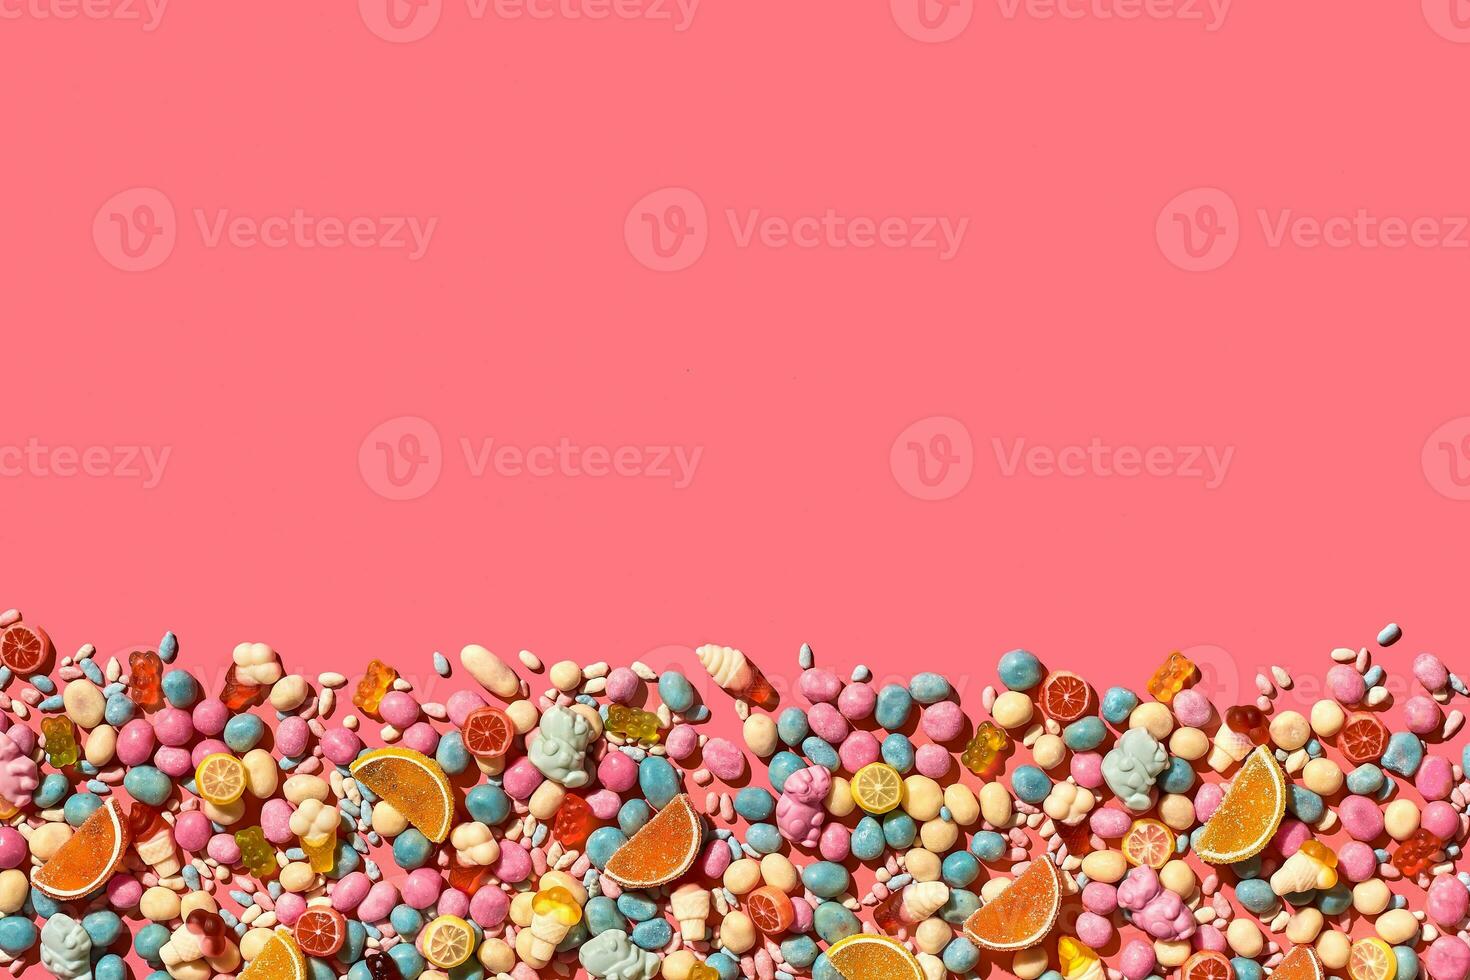 Various sweets, candys are palced on the photo on the coral background